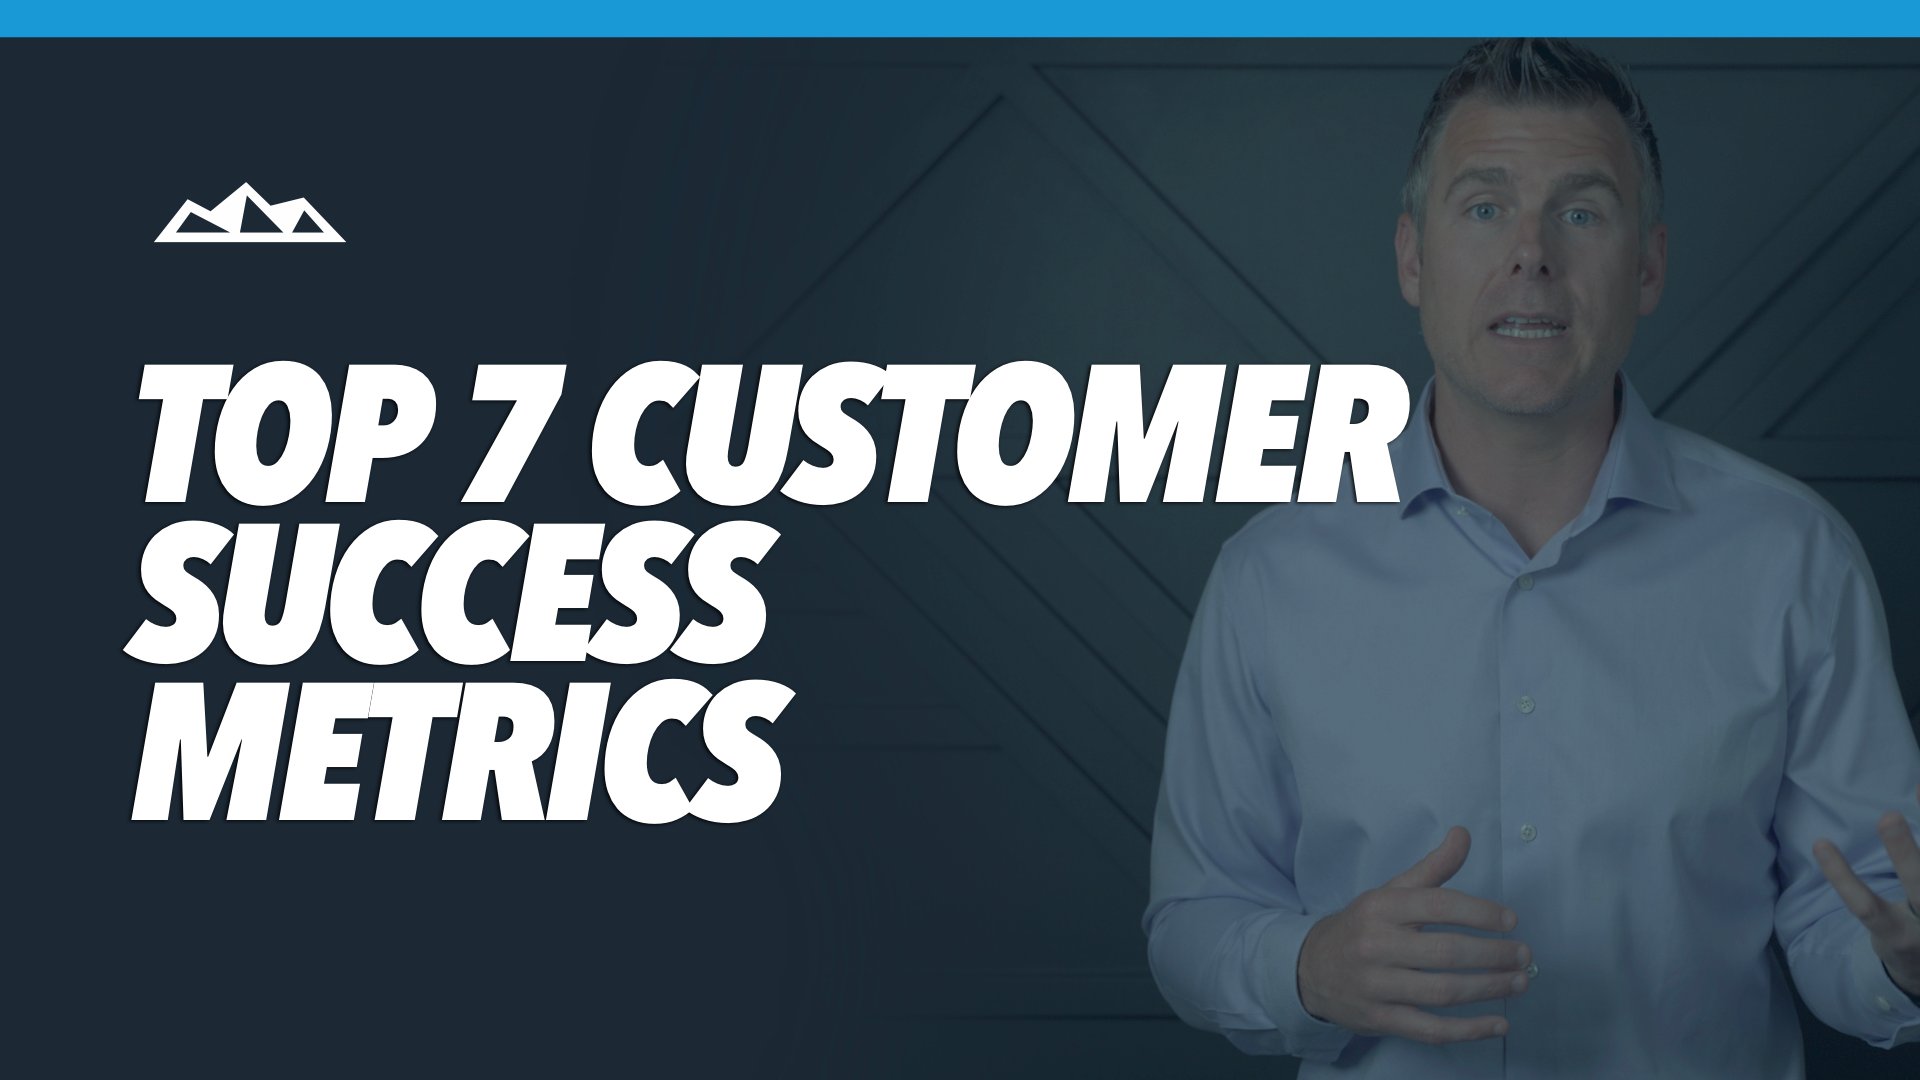 The 7 Customer Success Metrics That Actually Matter for SaaS Companies